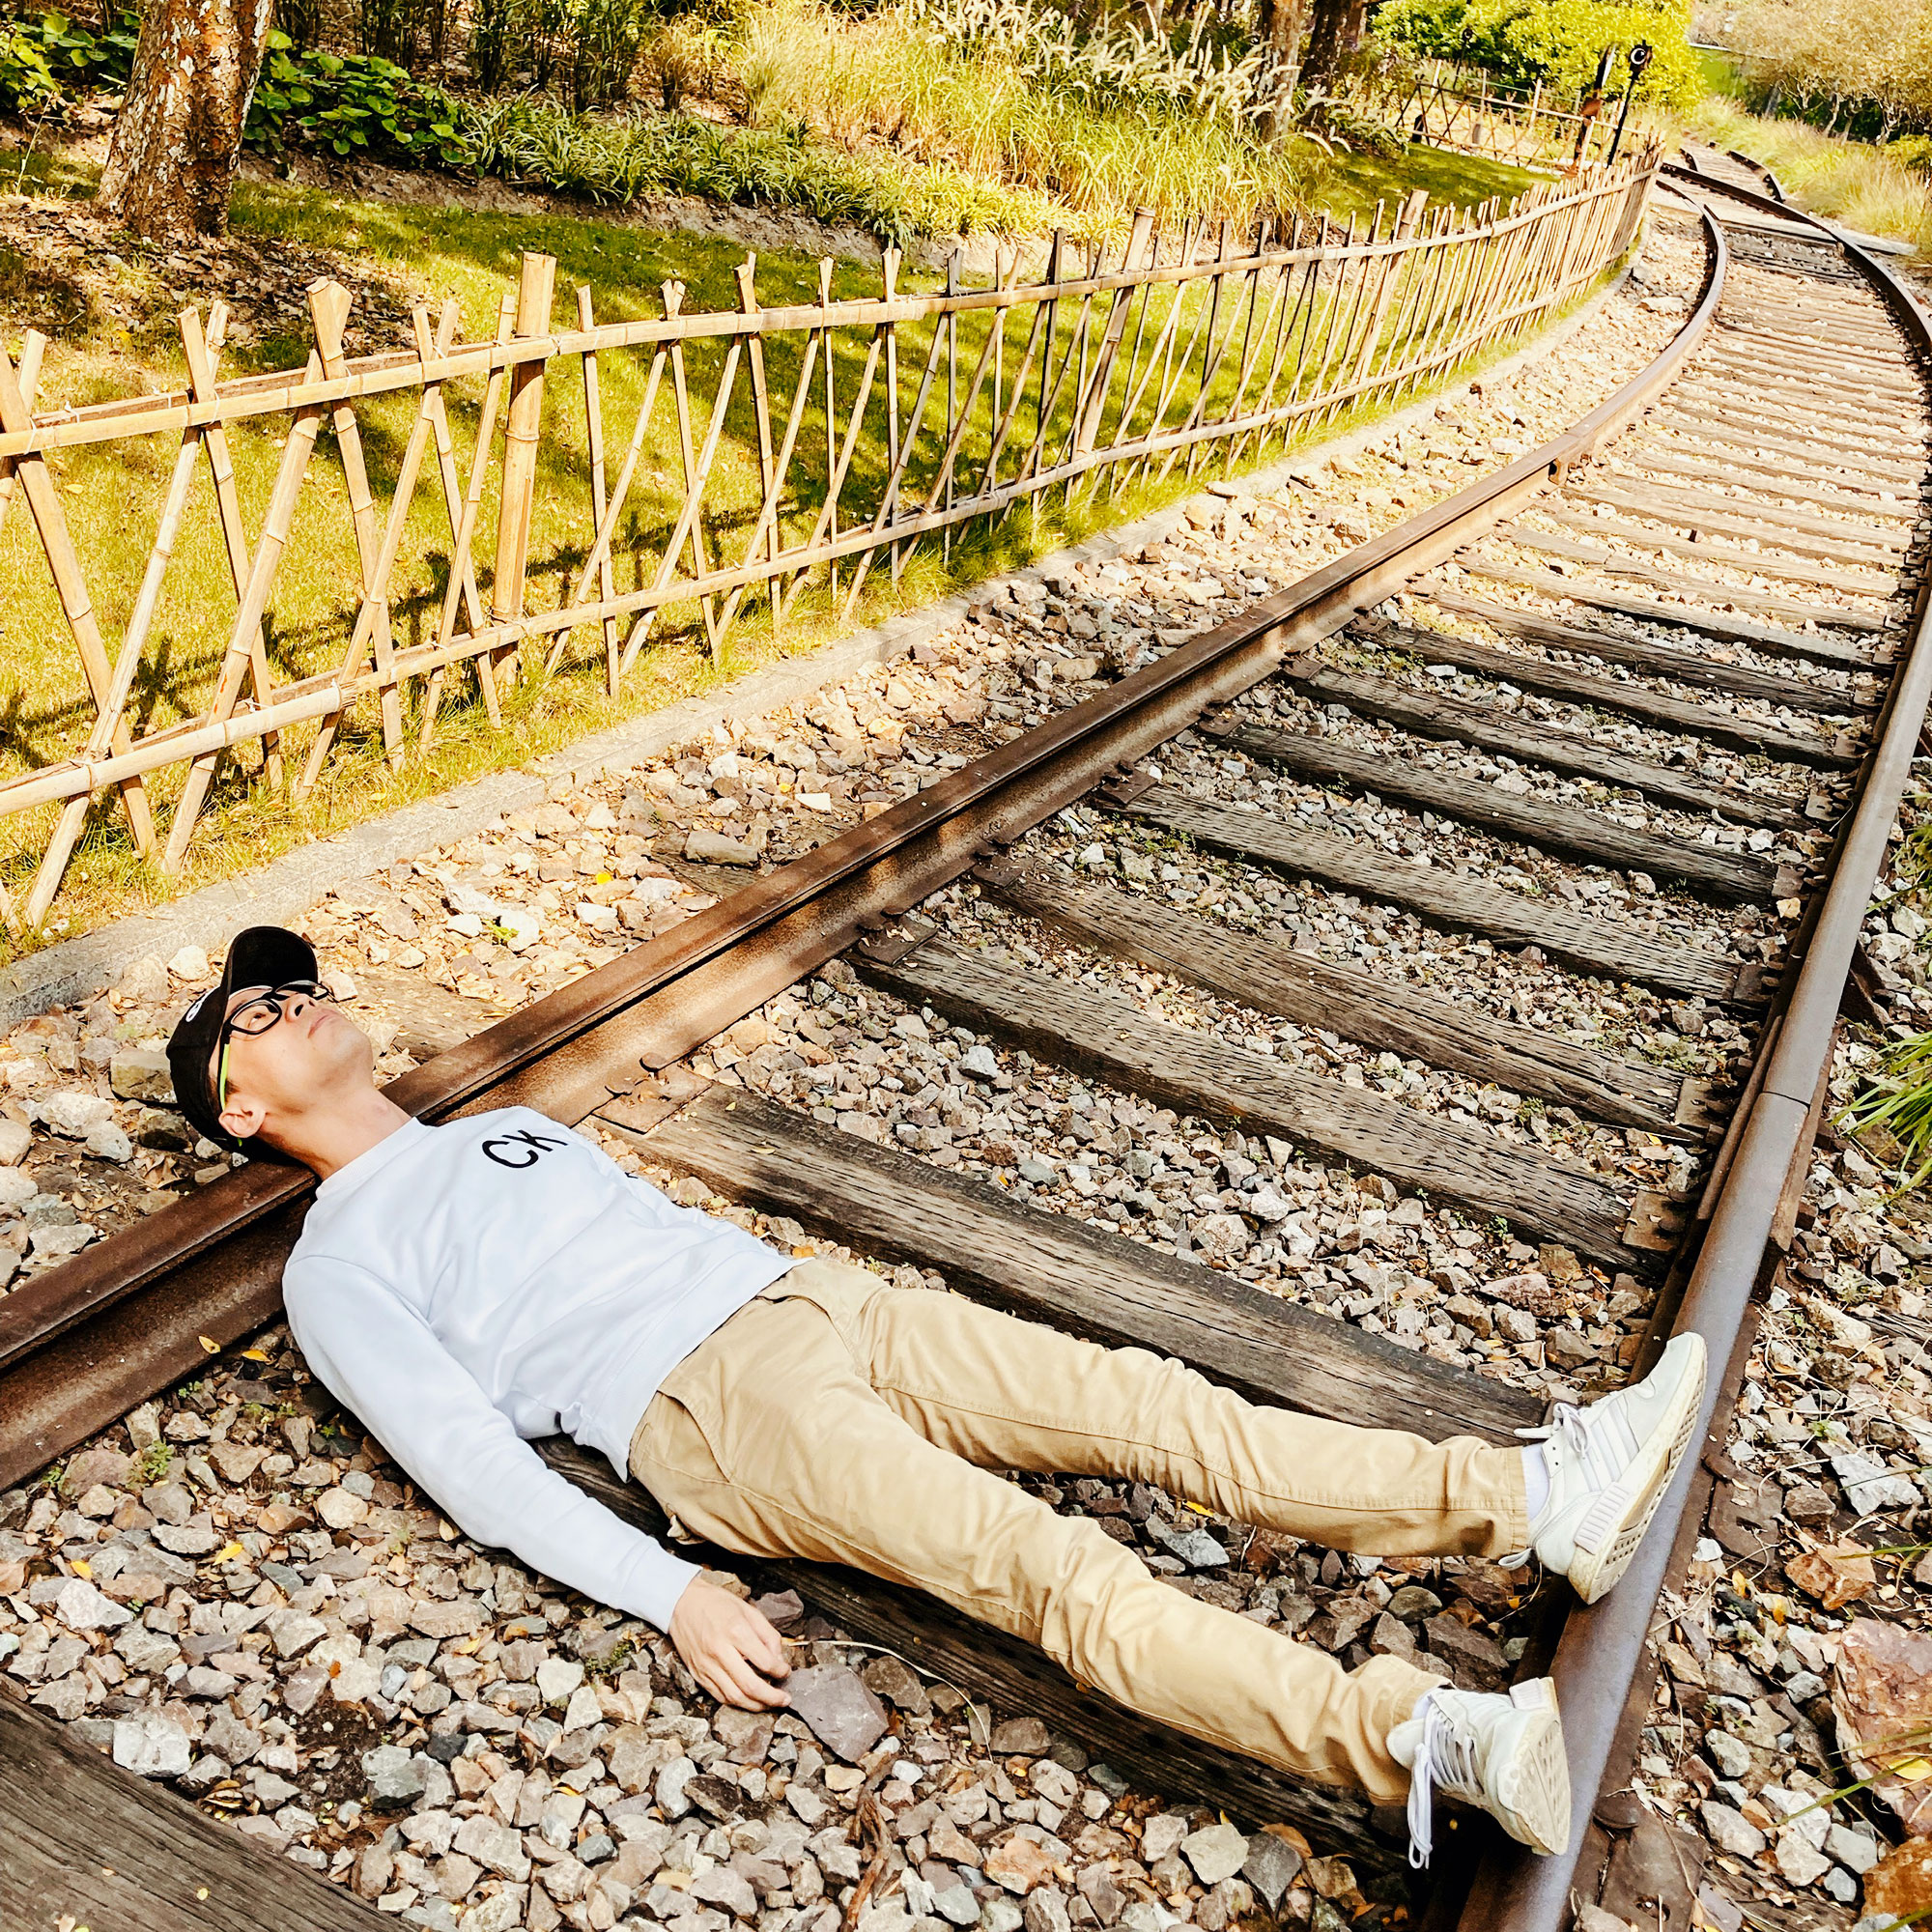 Lying on the track